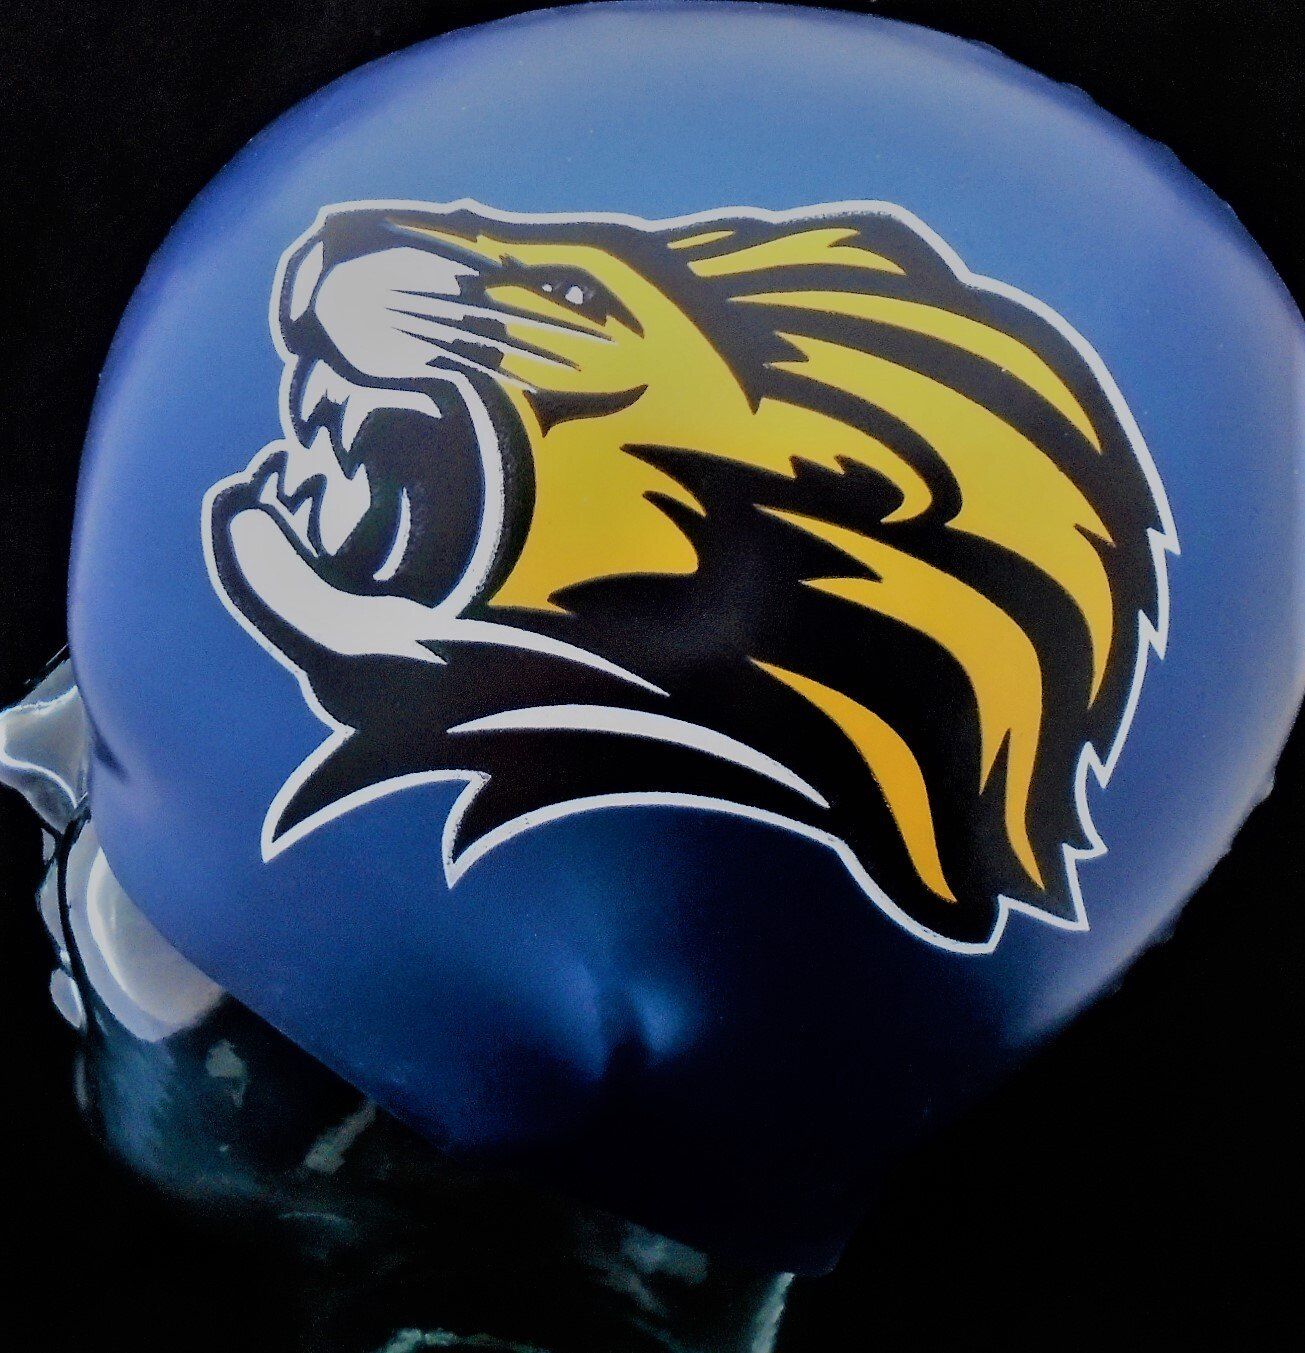 A blue helmet with a yellow and black lion on it